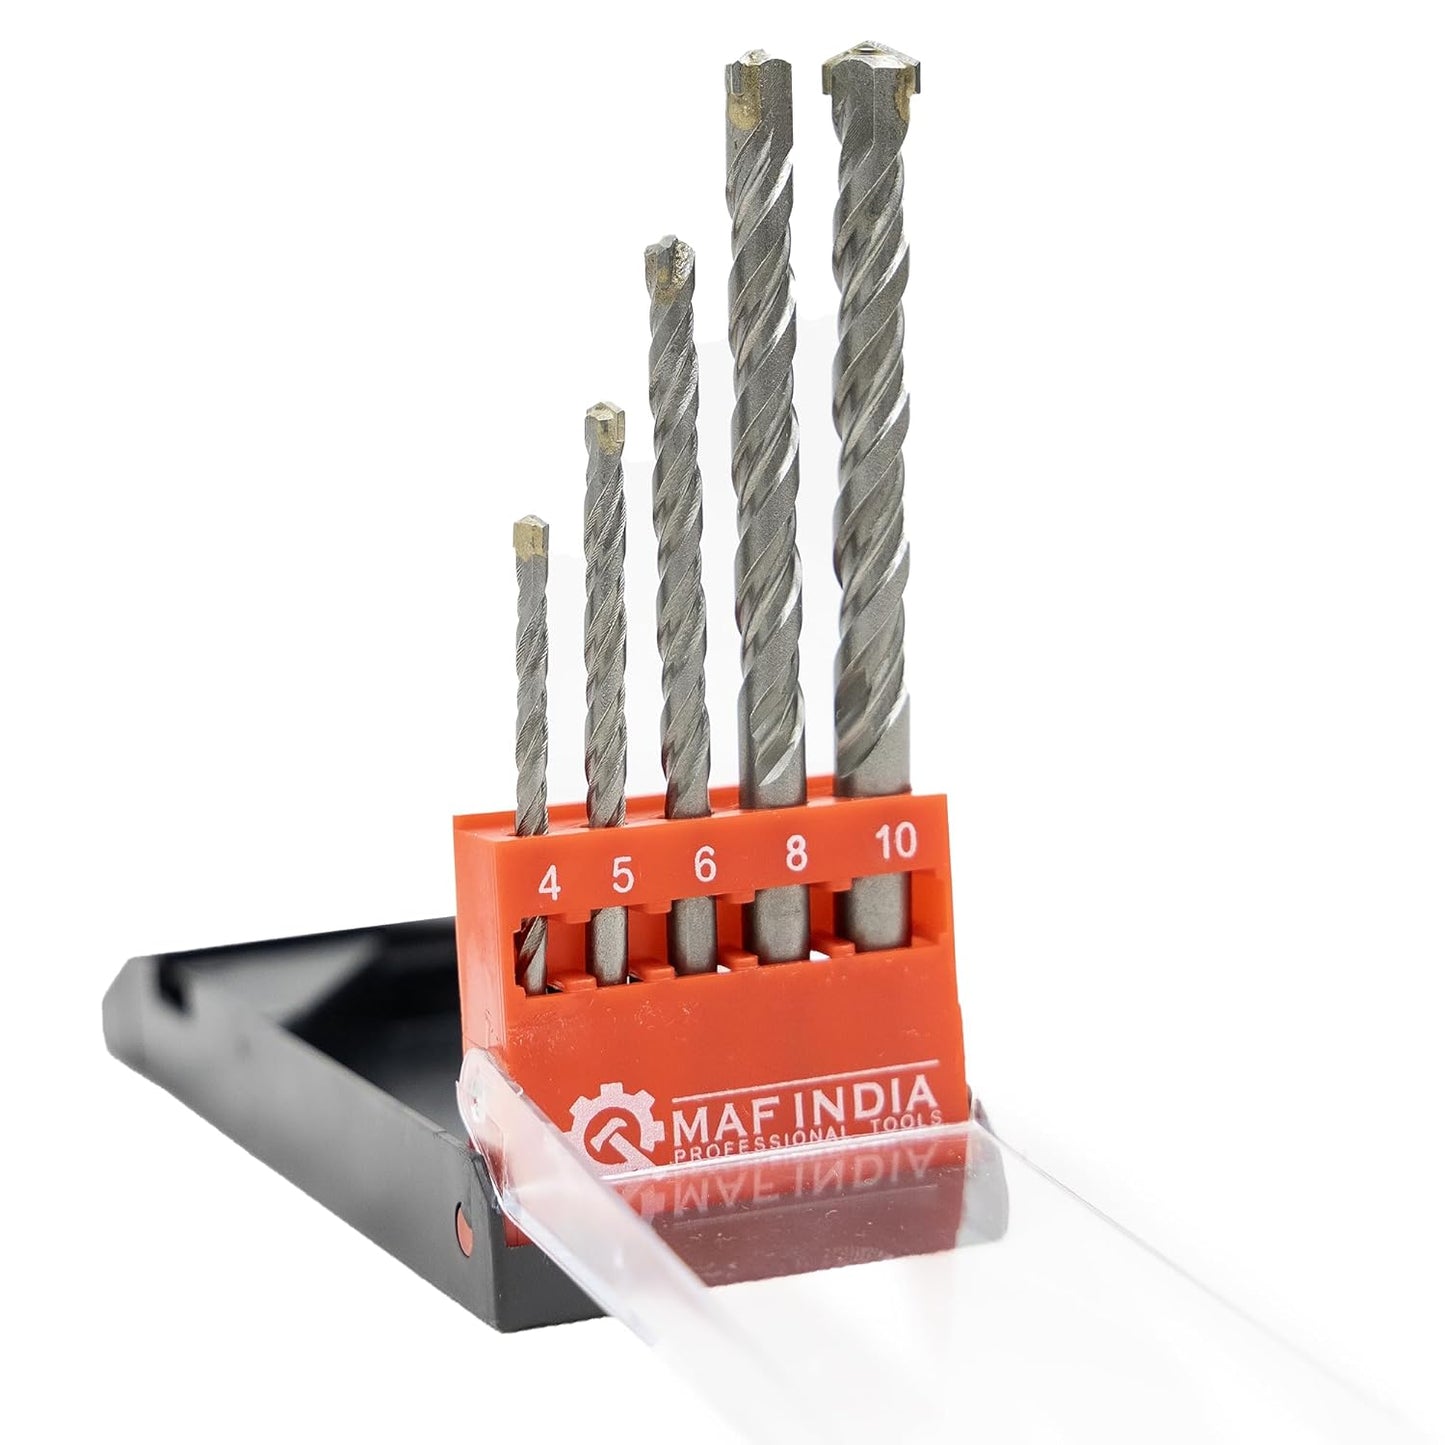 MAF 5Pcs Masonry Wall Drill Bit Set with Round Shank & Industrial Strength Carbide Tip for Tile, Brick, Cement, Concrete, Plastic & Wood (4, 5, 6, 8, 10mm)